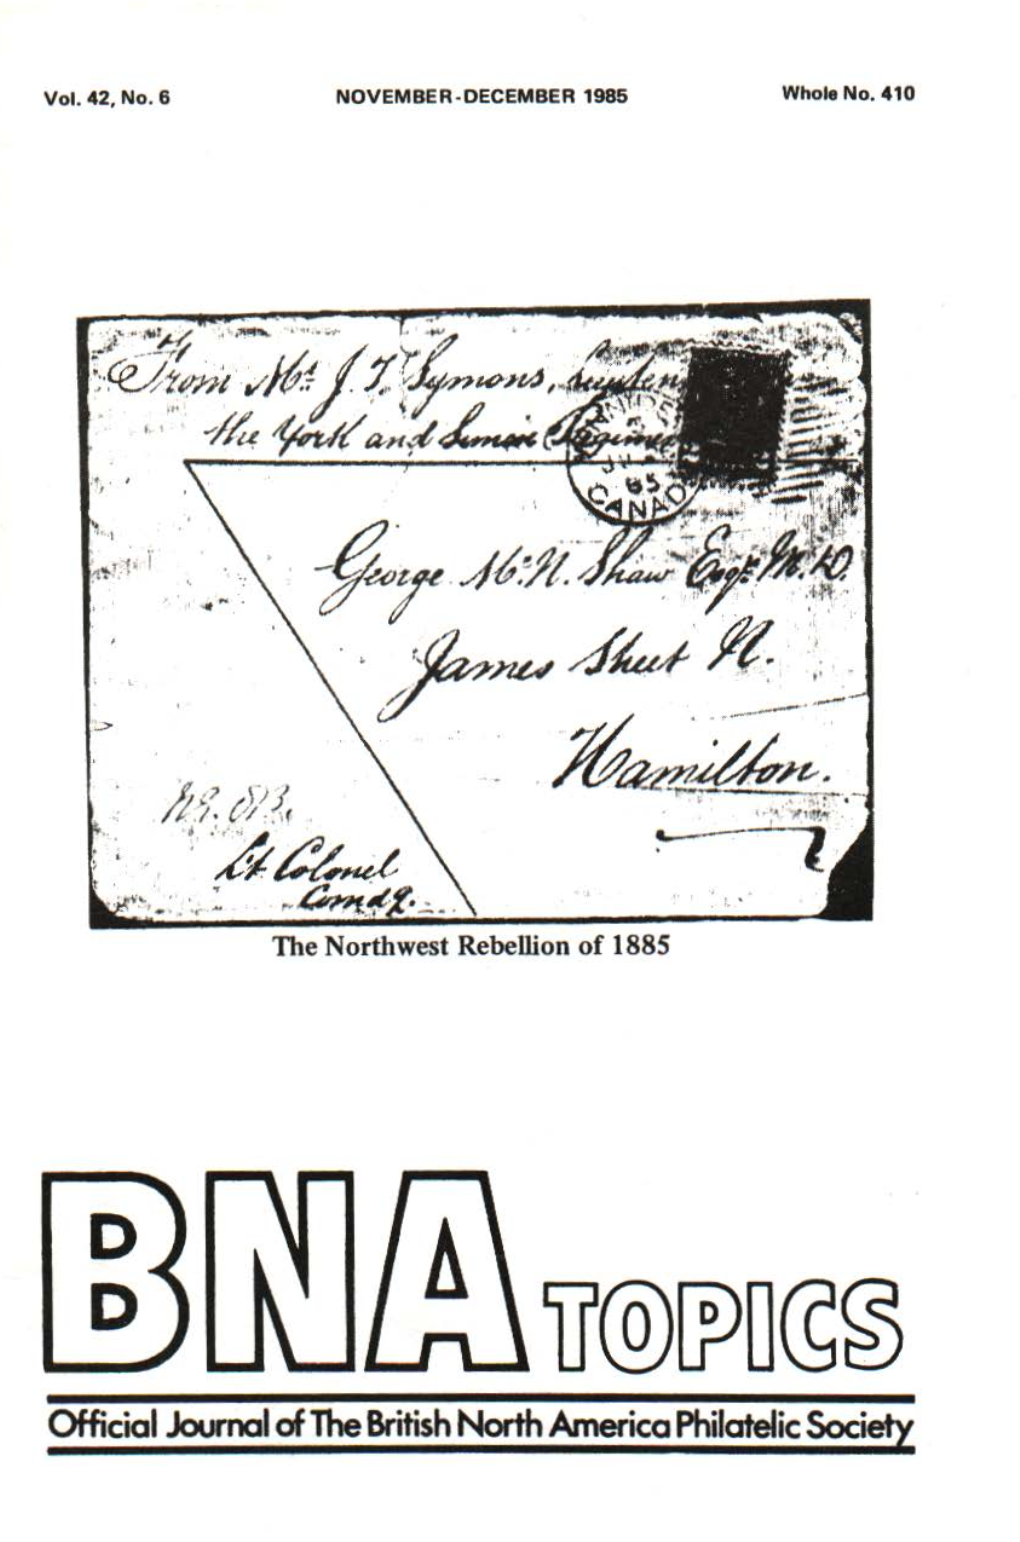 Official Journal D the British North America Philatelic Society the WORD